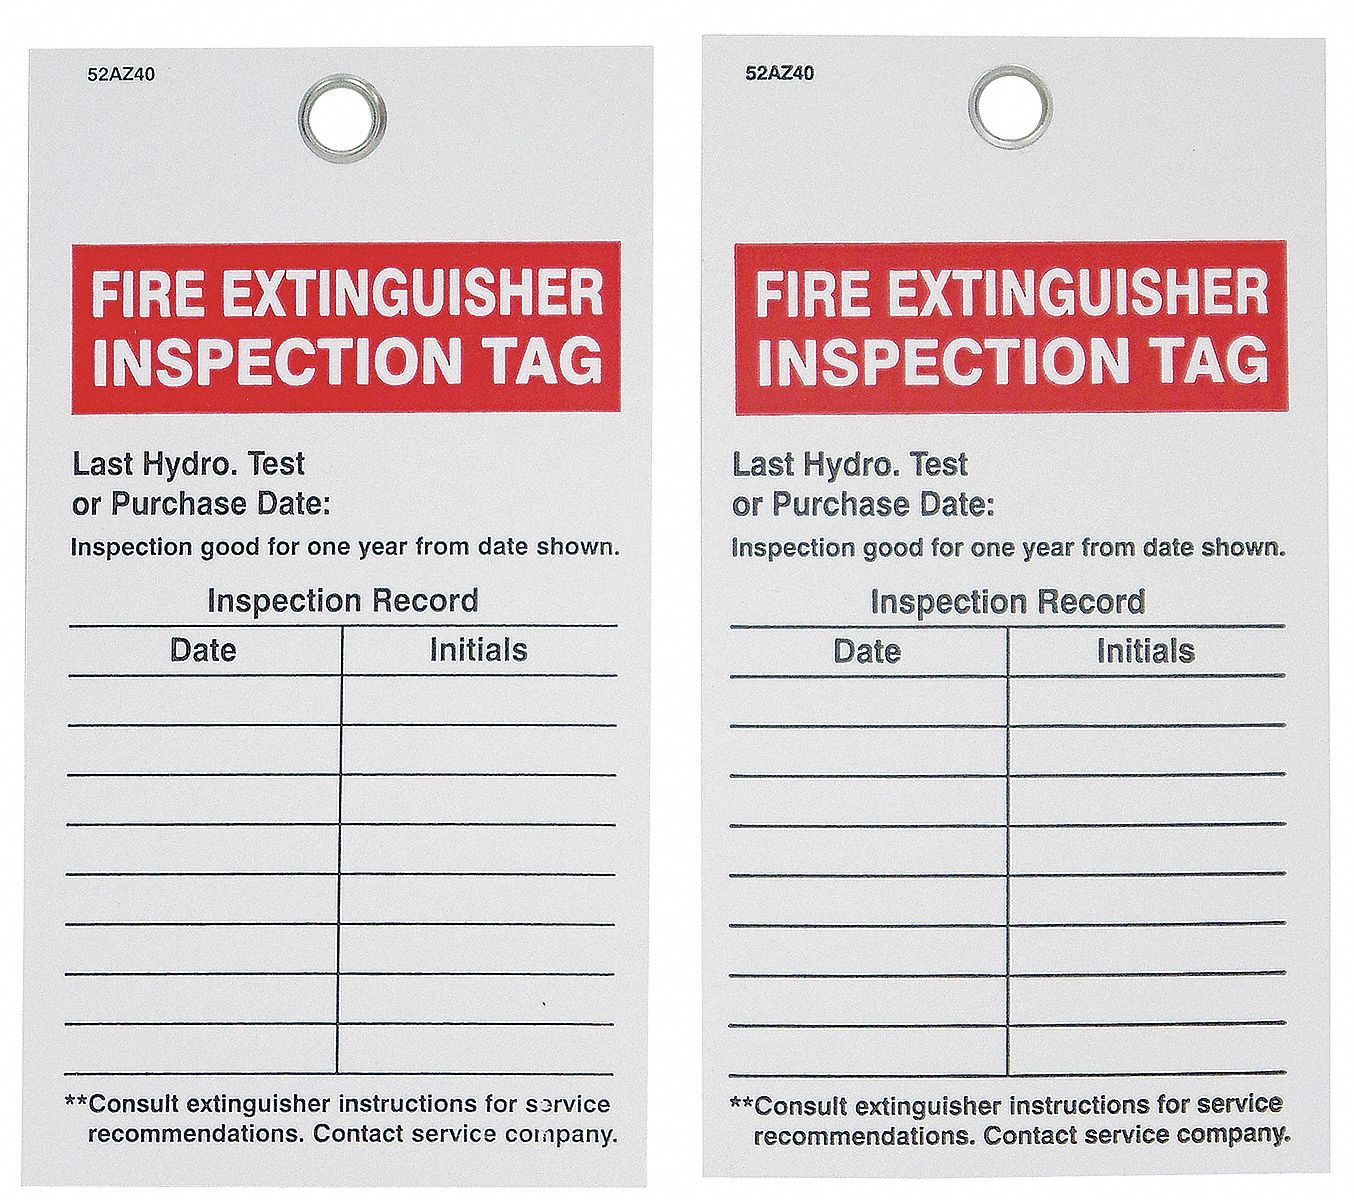 BADGER TAG & LABEL CORP Fire Extinguisher Inspection Tag, Fire